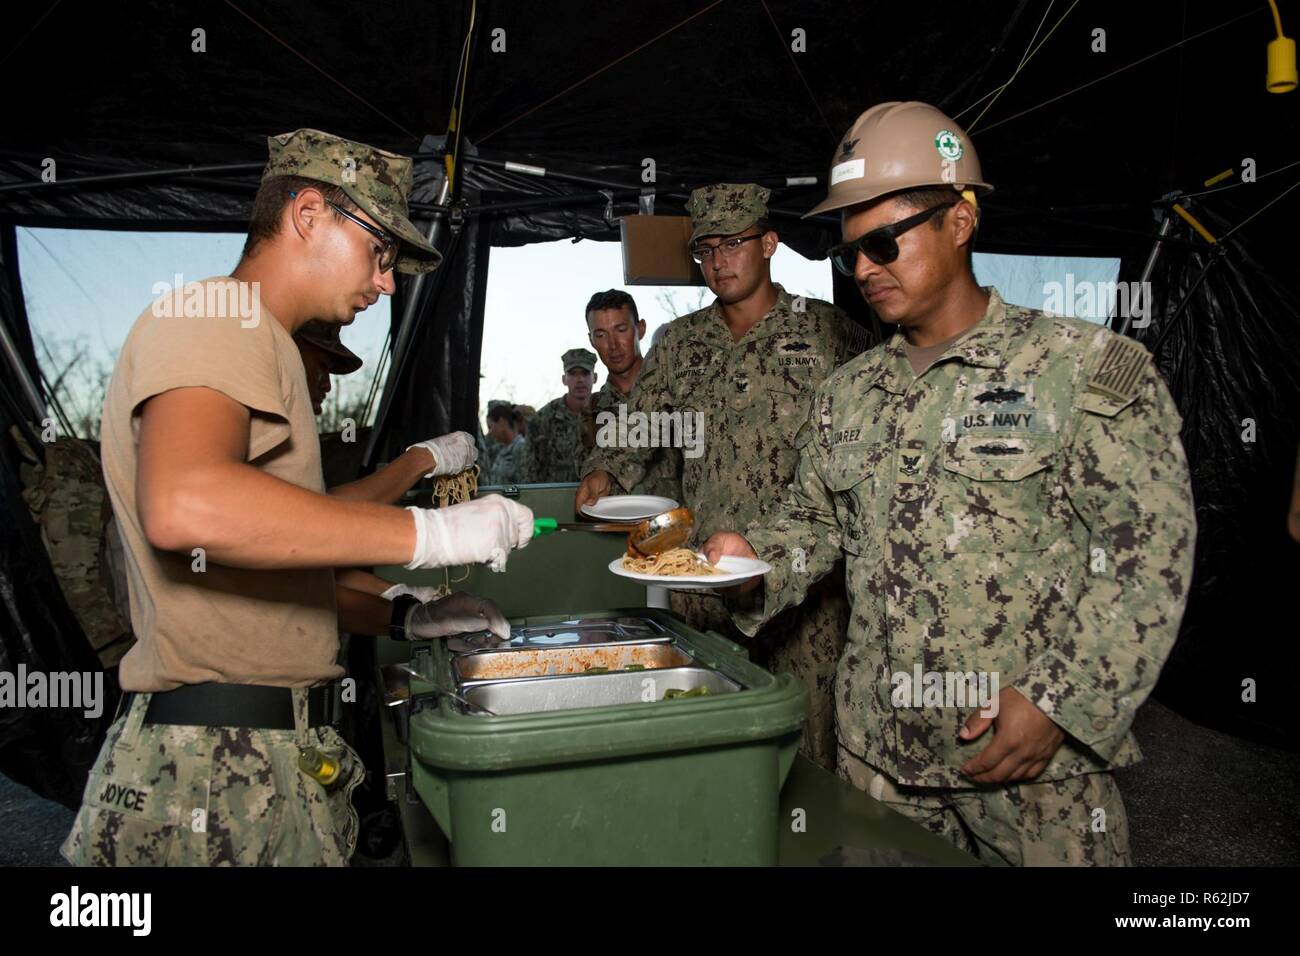 TINIAN, Commonwealth of the Northern Mariana Islands (Nov. 18, 2018) Construction Mechanic Construction Apprentice James Joyce, assigned to Naval Mobile Construction Battalion 1, Detachment Guam, from Pittsburgh, serves dinner to Sailors during recovery efforts. Service members from Joint Region Marianas and U.S. Indo-Pacific Command are providing Department of Defense support to the Commonwealth of the Northern Mariana Islands' civil and local officials as part of the Federal Emergency Management Agency-supported Super Typhoon Yutu recovery efforts. Stock Photo